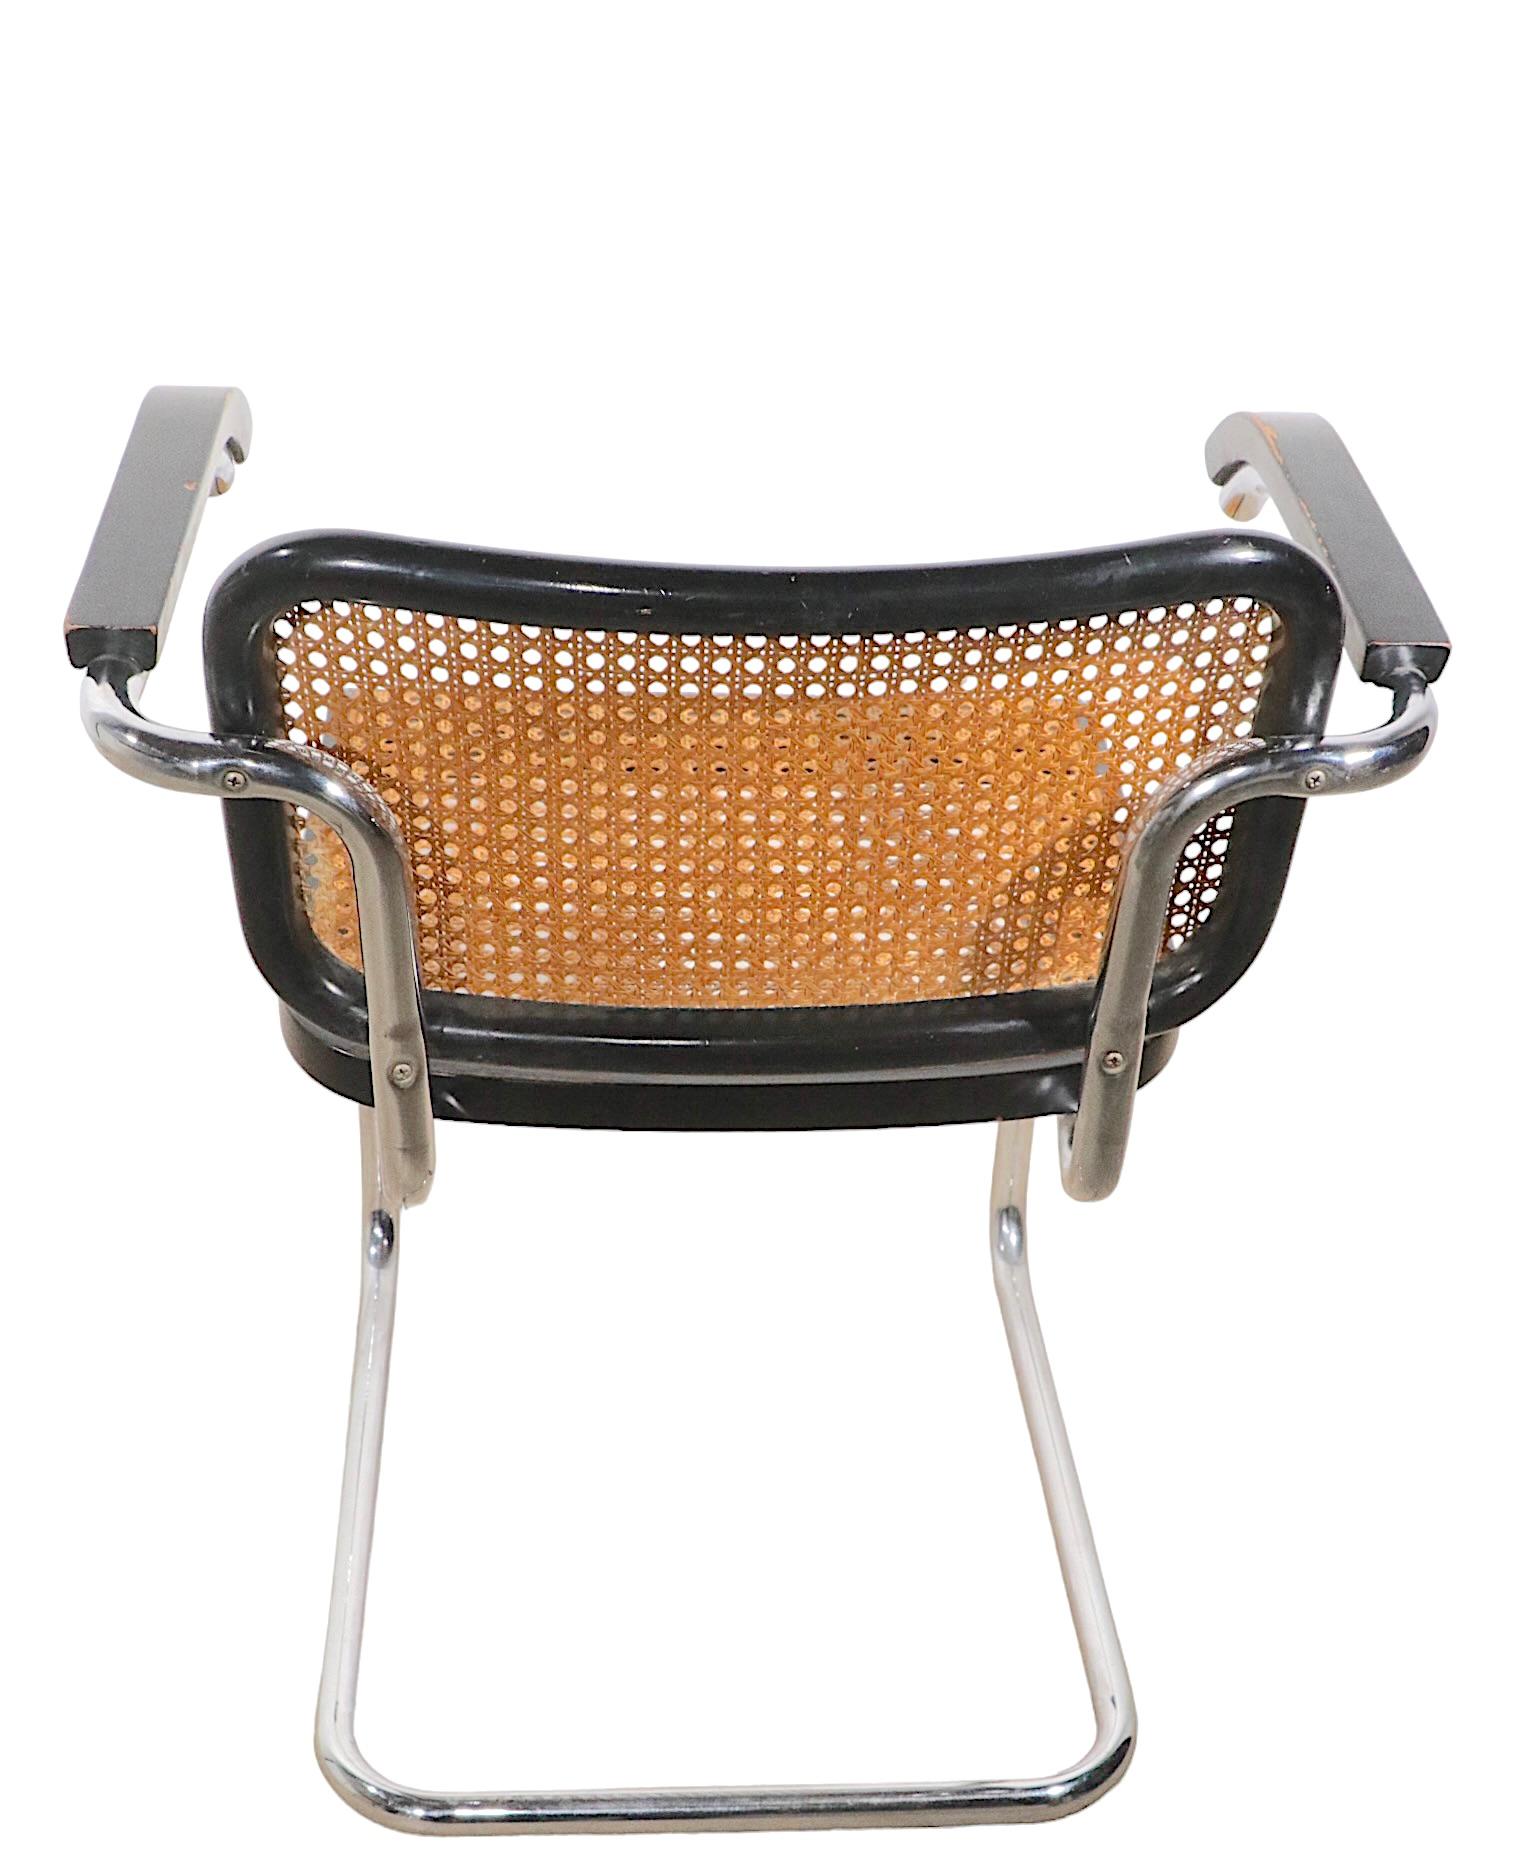 Cane Chrome and Black Cesca Chair Designed by Marcel Breuer Made in Italy circa 1970s For Sale